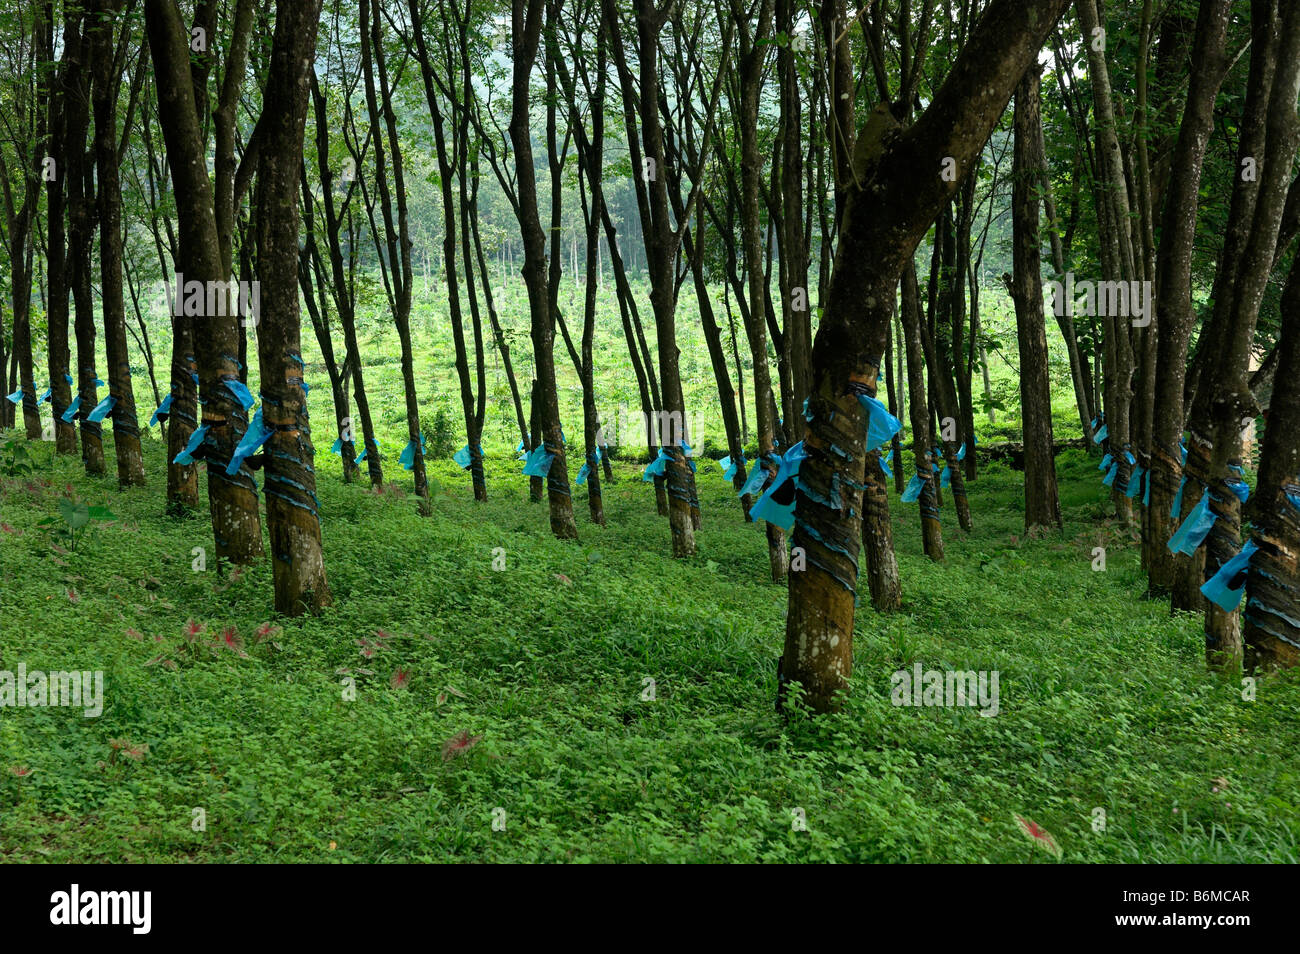 Rubber tree Hevea brasiliensis plantation with tapping to collect latex in the Western Ghats region of Kerala India Stock Photo